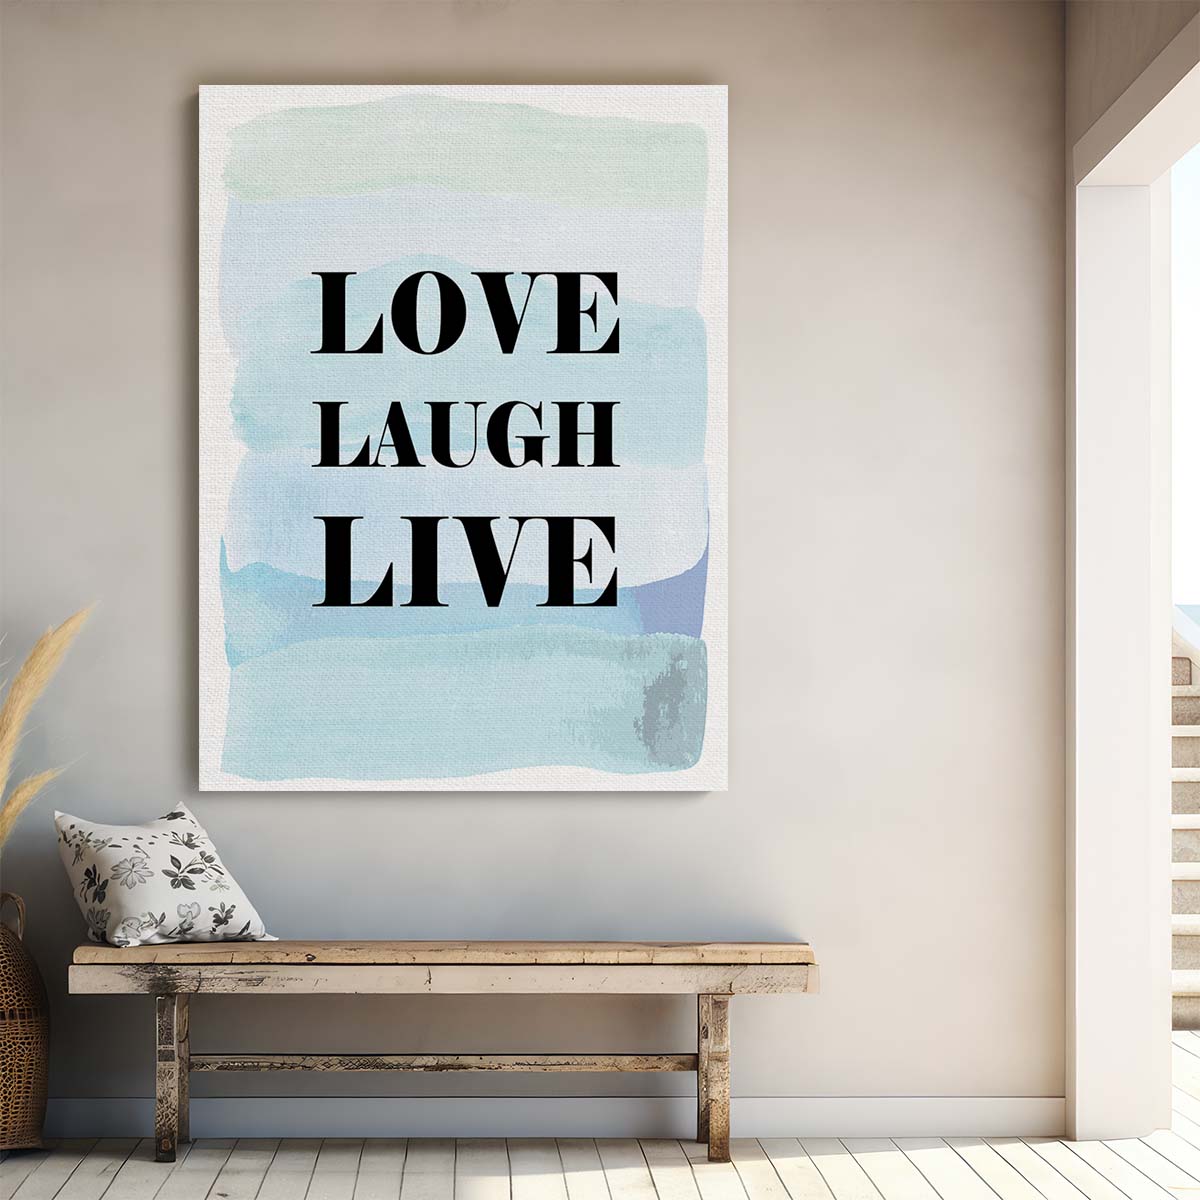 Love, Laugh, Live Inspirational Quote Blue Illustration Wall Art by Luxuriance Designs, made in USA